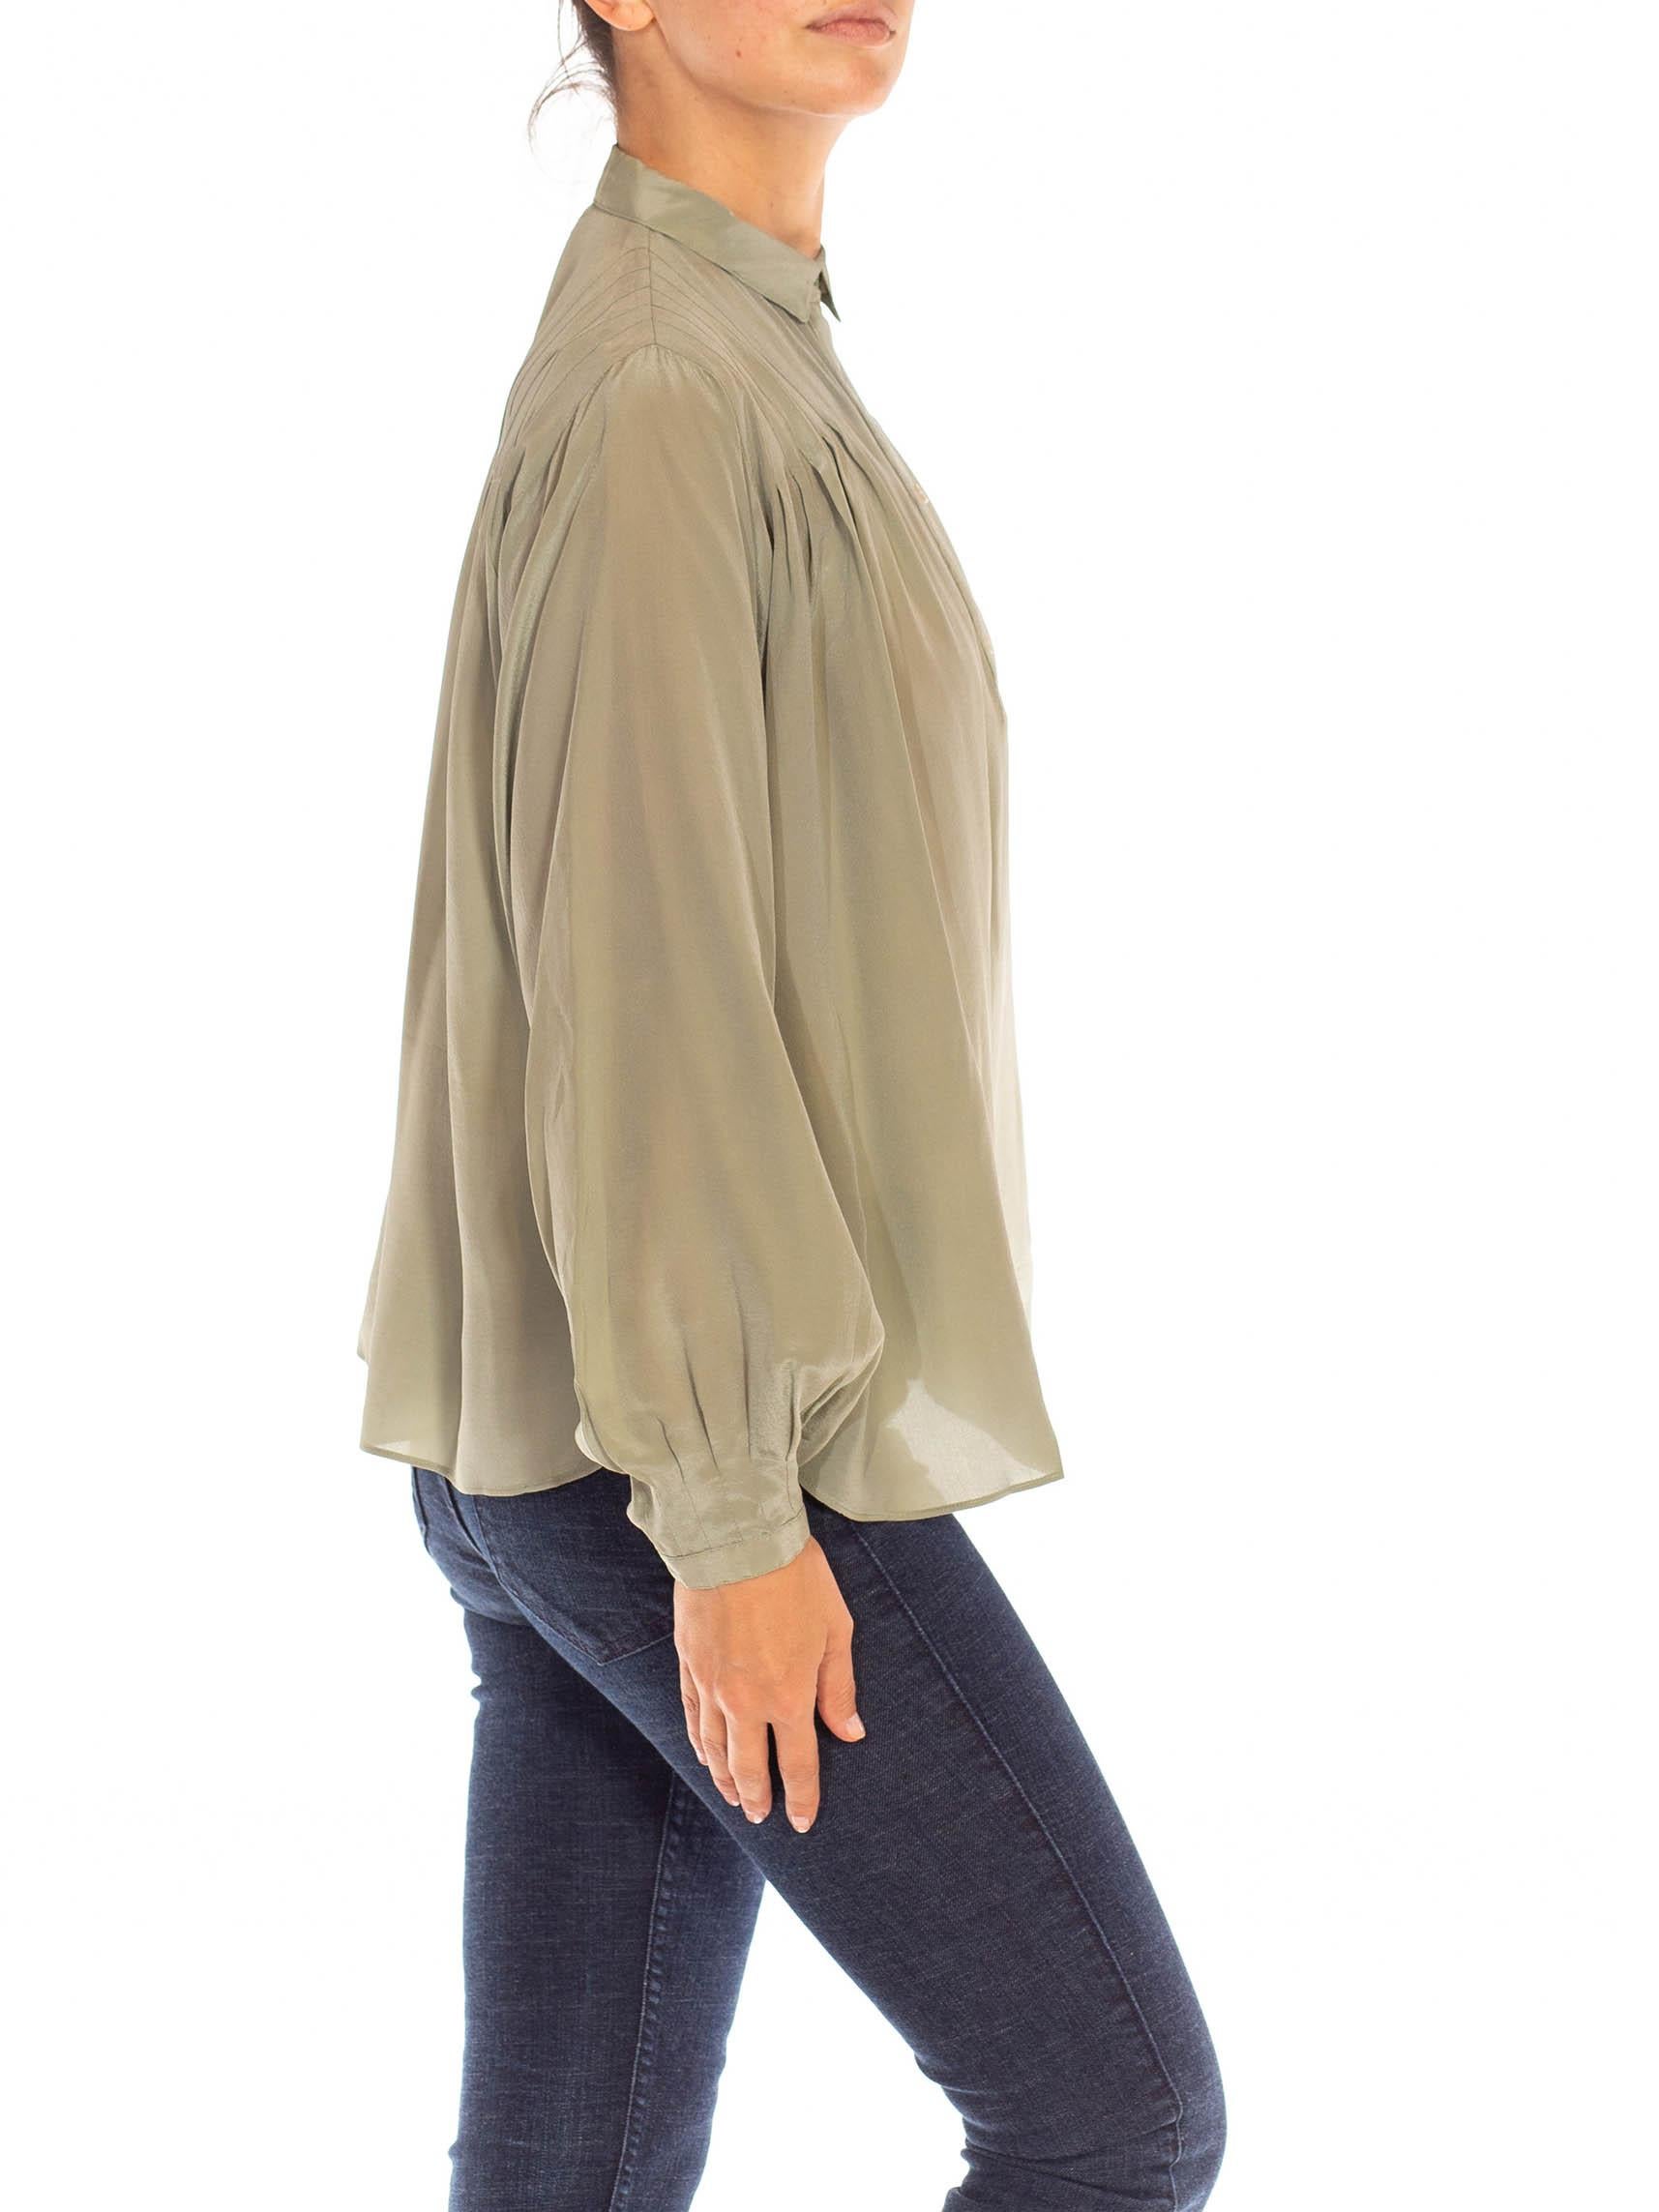 1980S Jade Silk Chiffon Blouse In Excellent Condition For Sale In New York, NY